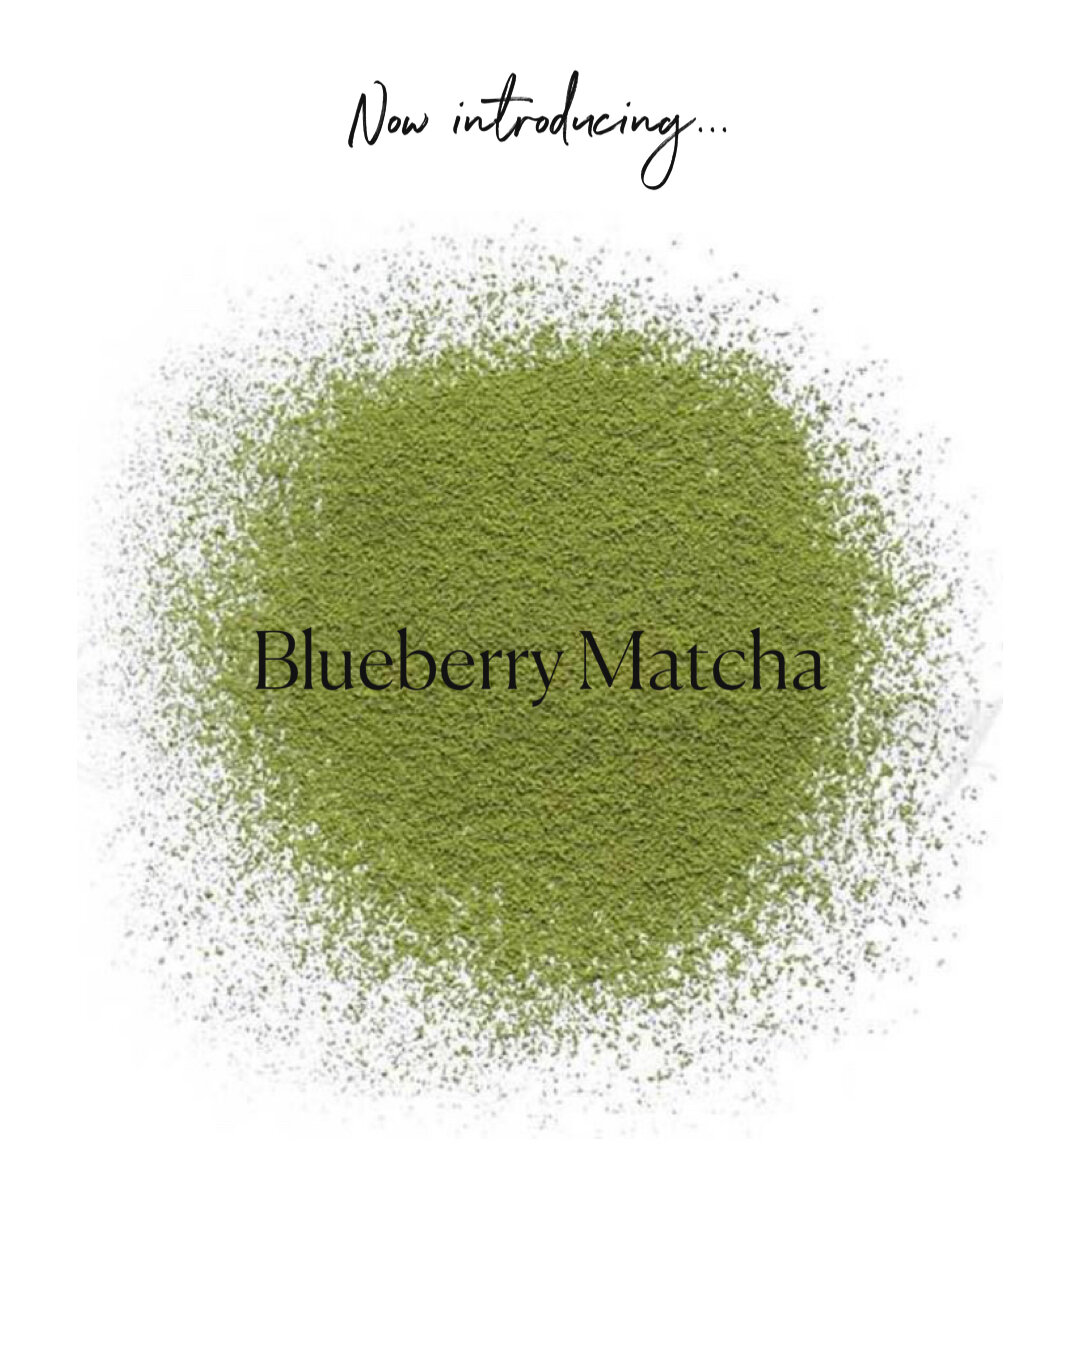 The time is now! Just launched our first three matchas 💚 Classic matcha, chai matcha, blueberry matcha&mdash; they&rsquo;re ready to be added to your morning and/or midday routine! 

www.bighandsometea.com

#matchatea #dallastea #planotea #dfwtea #o